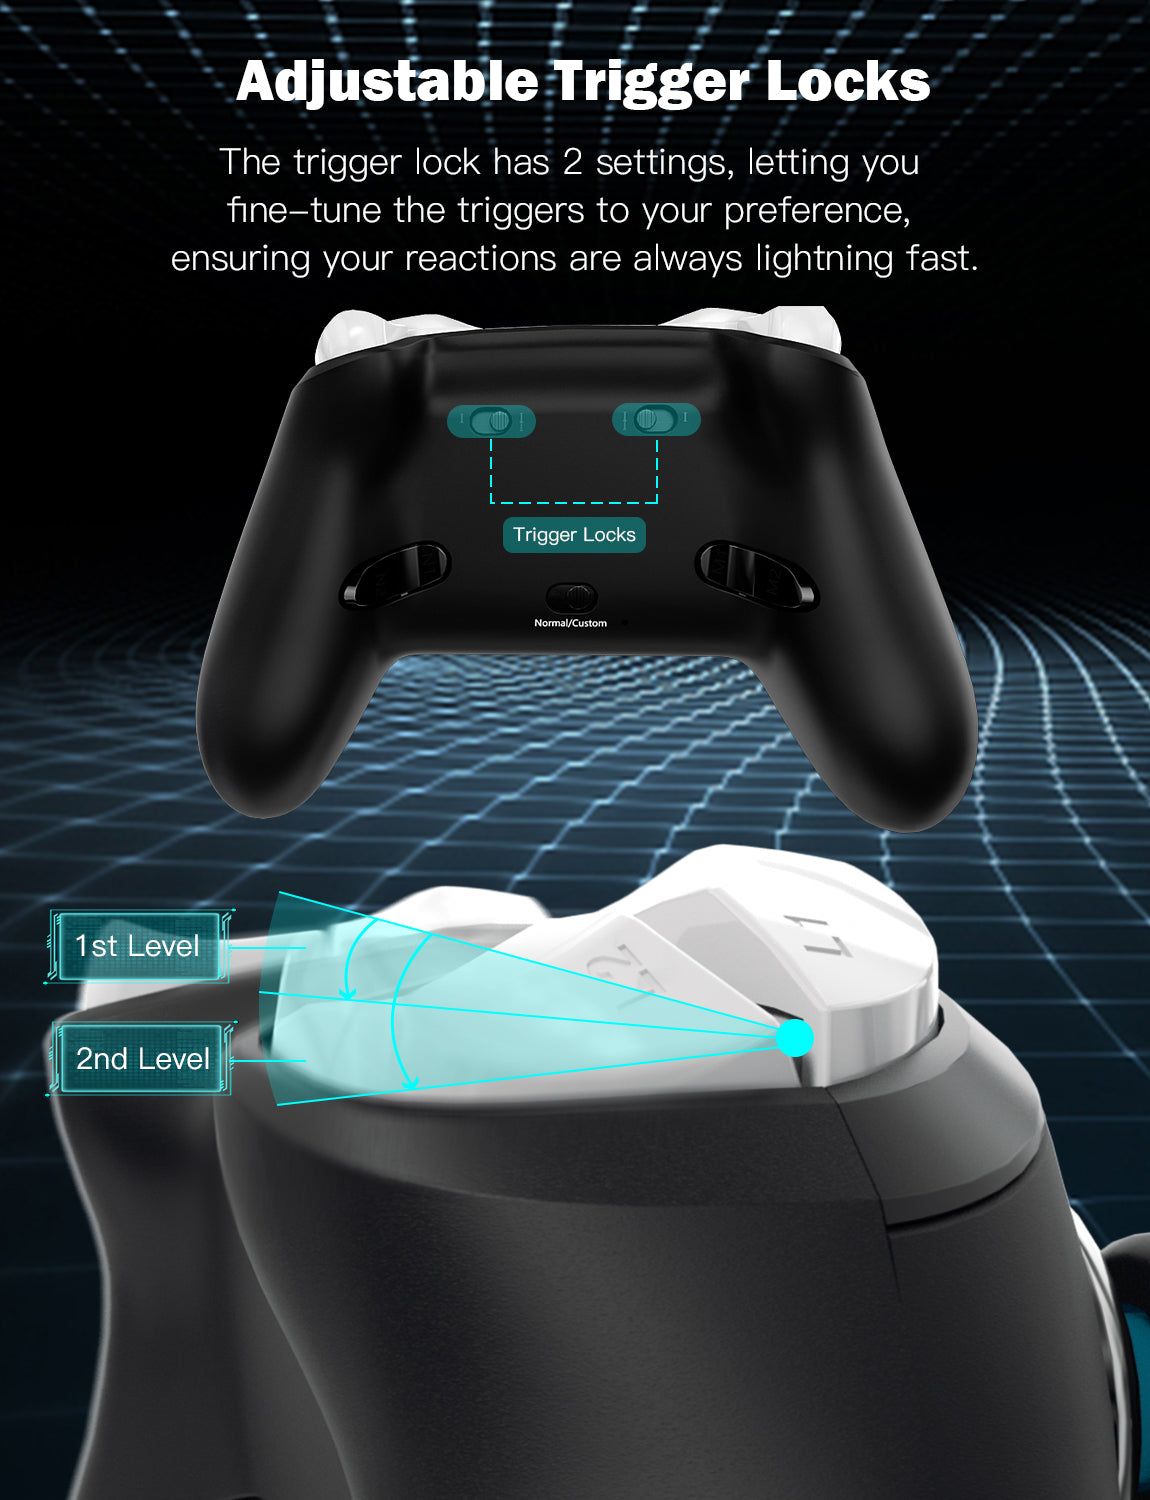 Showcasing two adjustable trigger stops on the back of the controller.